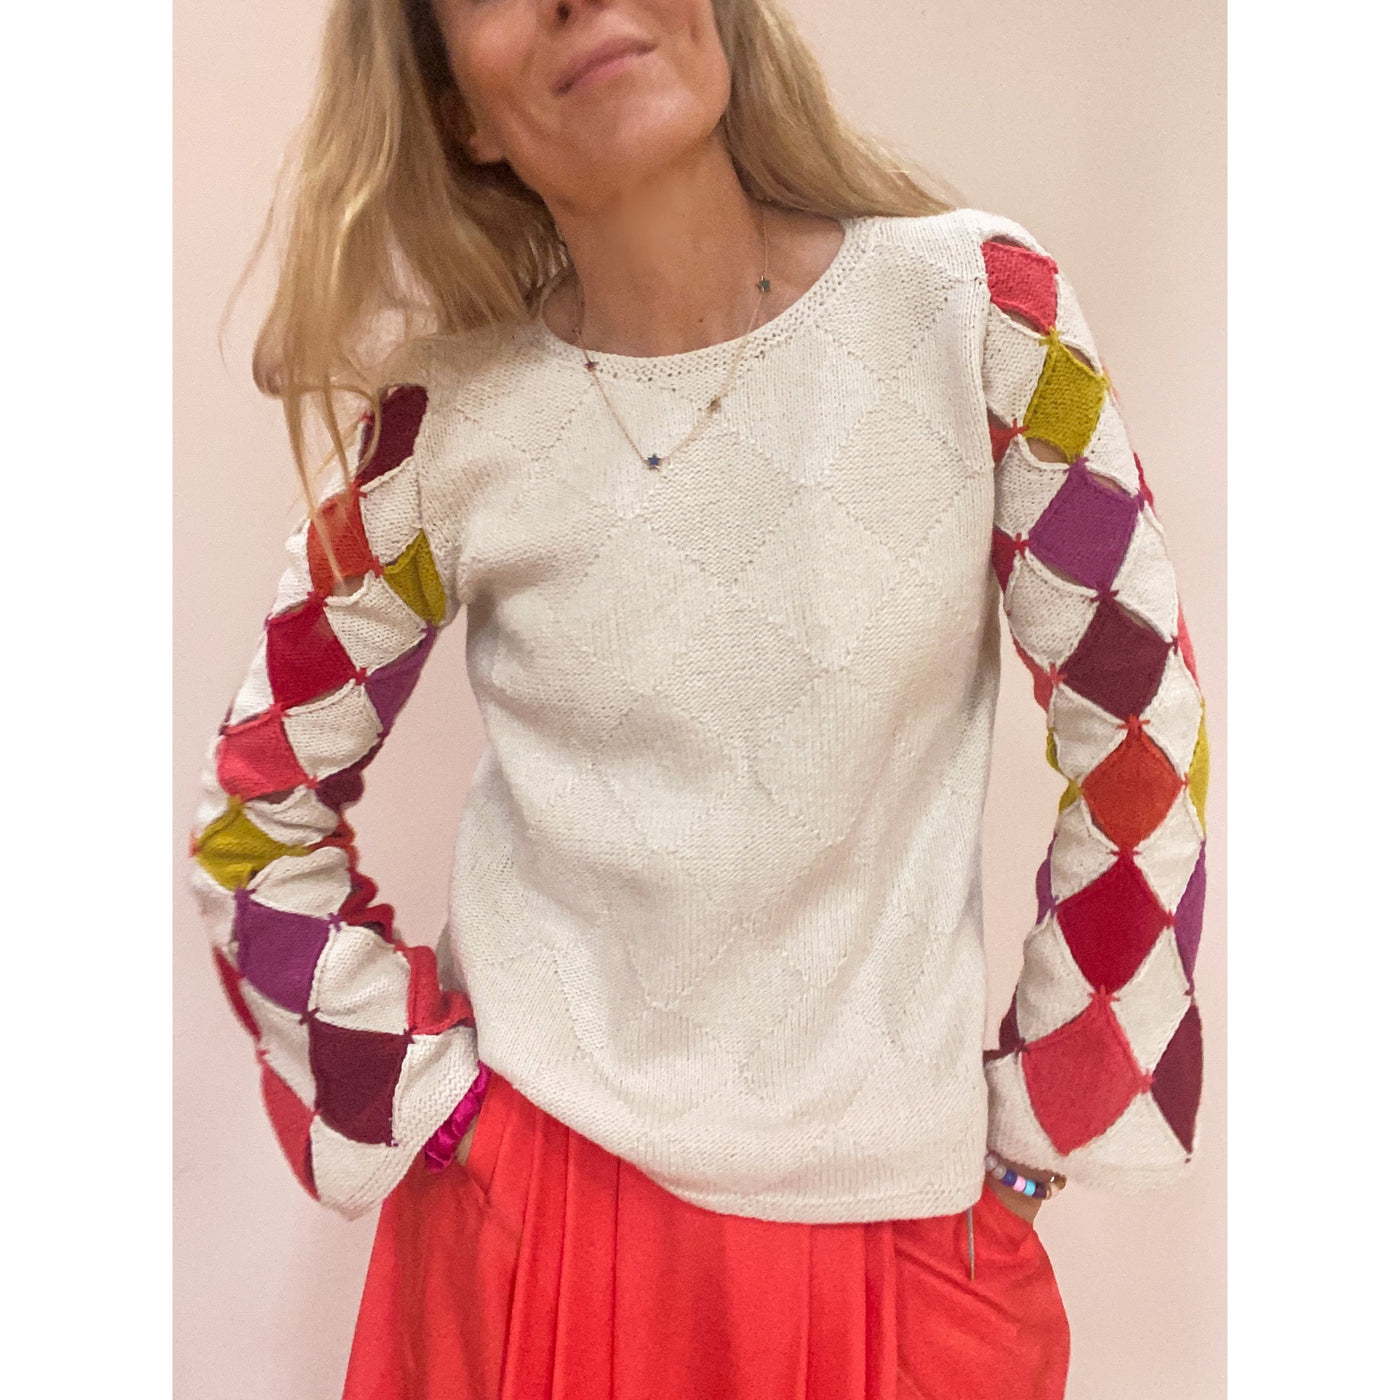 Harlequin Hand Knit - Multi Colour Sleeve